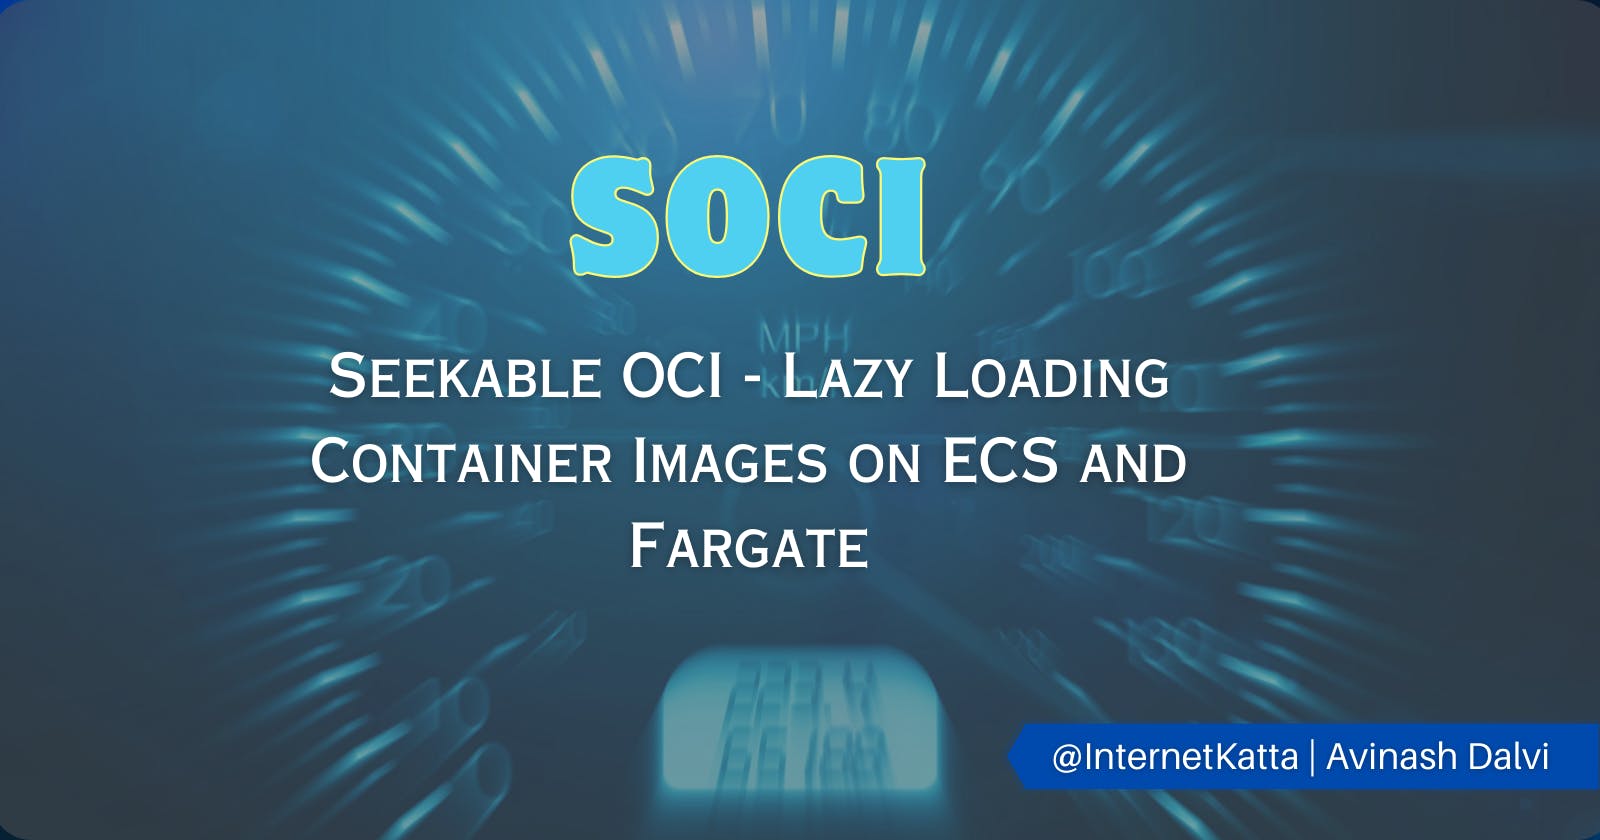 Seekable OCI - Lazy Loading Container Images on ECS and Fargate